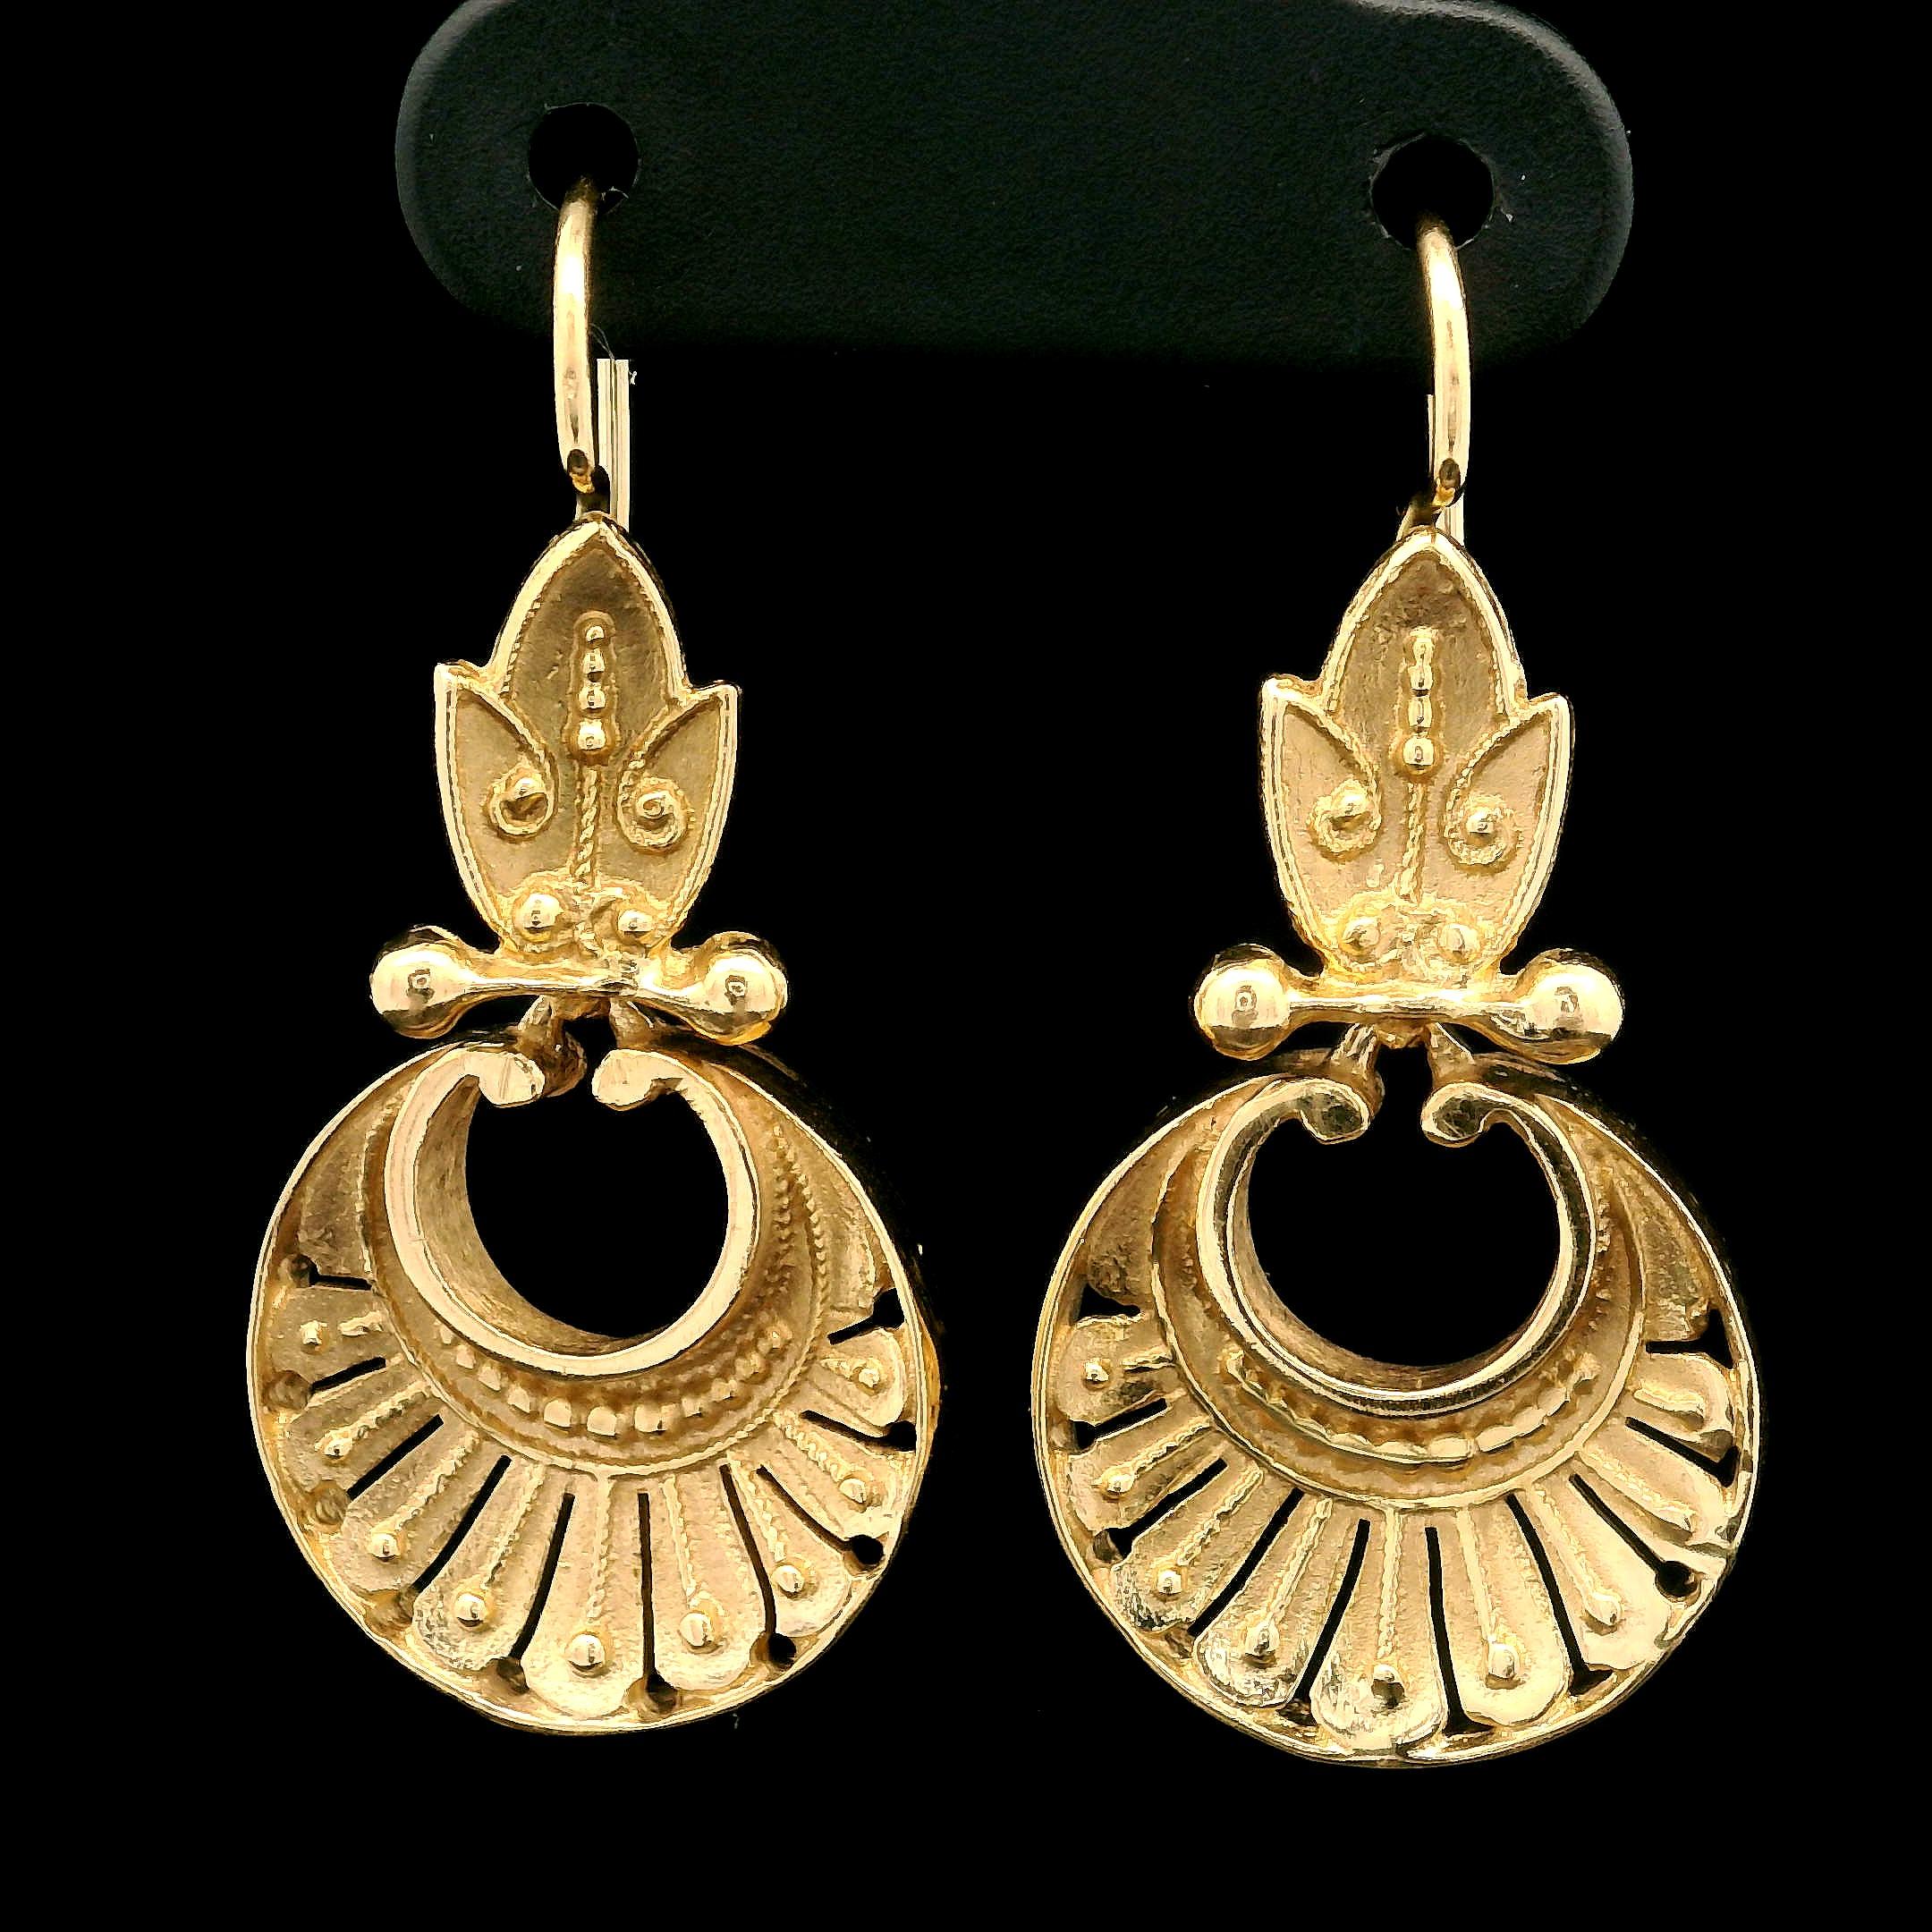 Vintage Etruscan Revival 14k Yellow Gold Ornate Dangle Drop Earrings For Sale 1